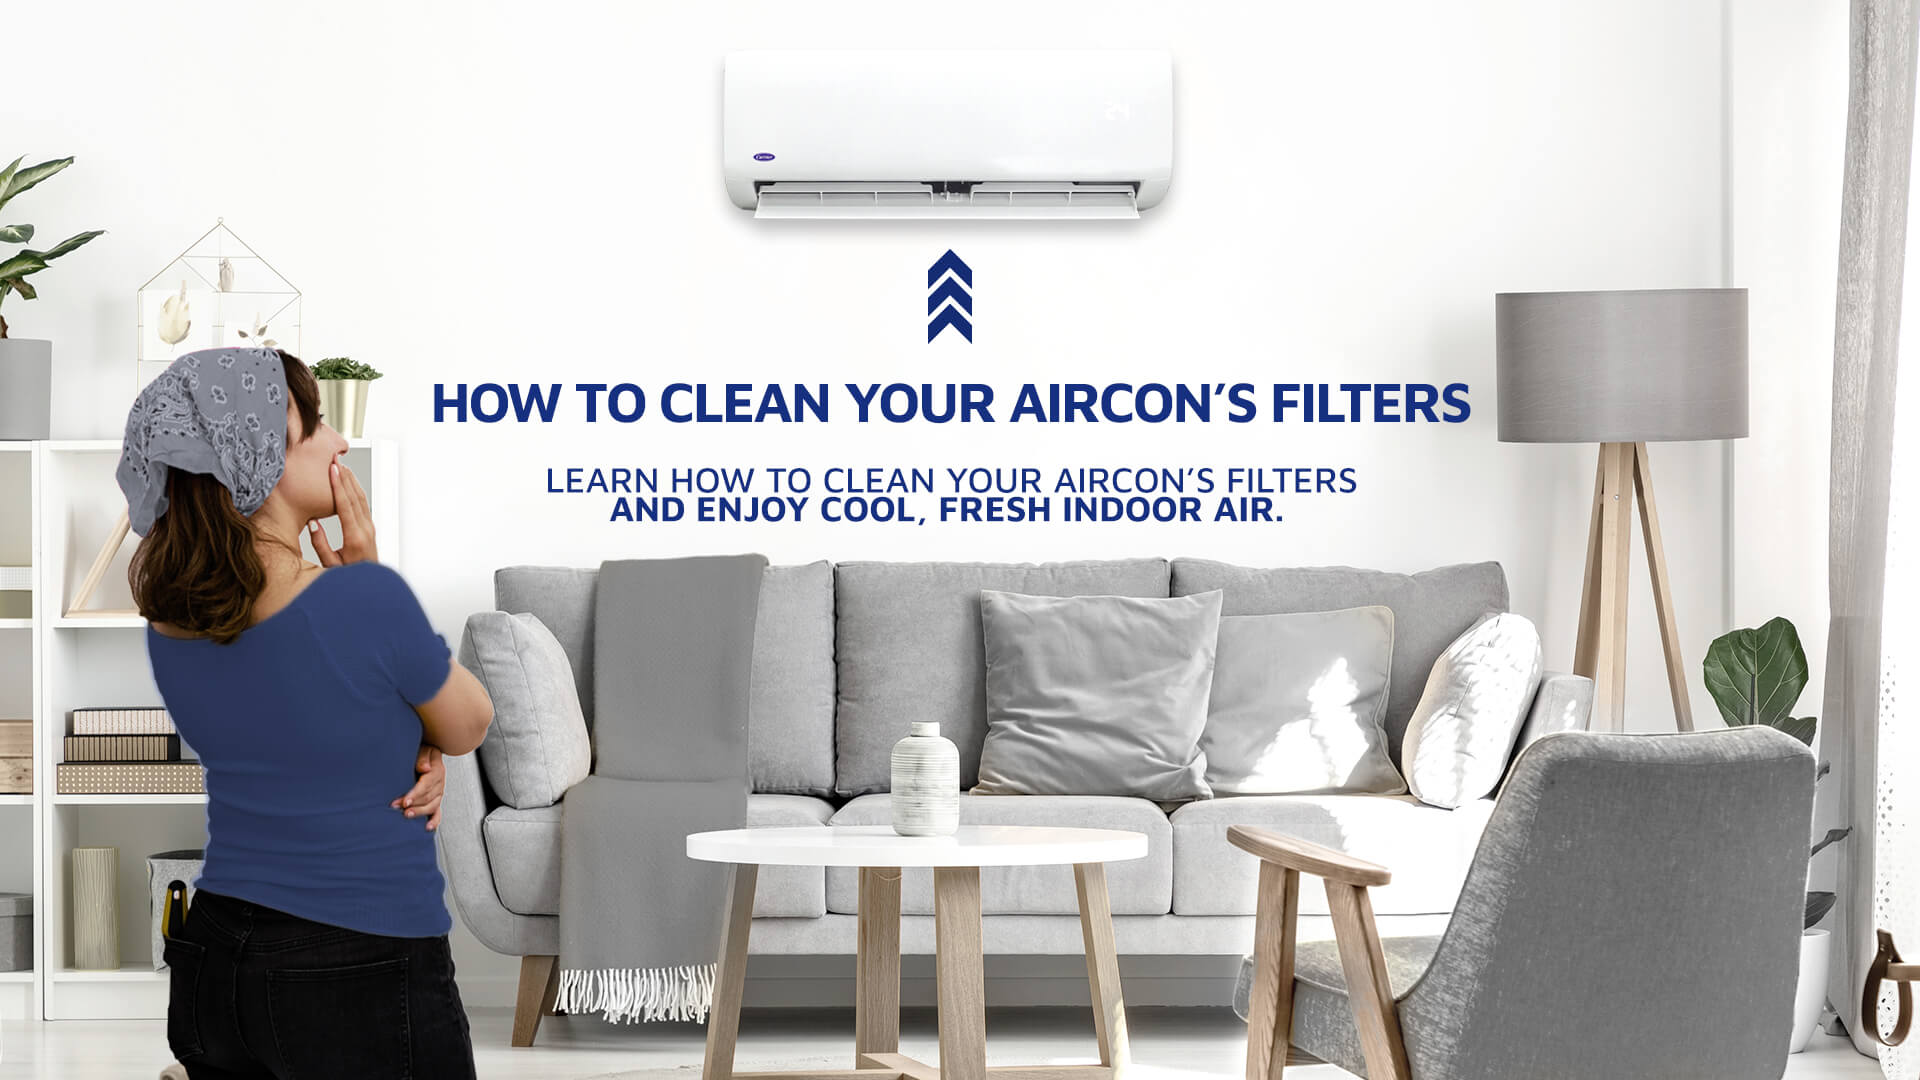 diy-ac-filter-cleaning-image-banner-carrier-philippines-blog